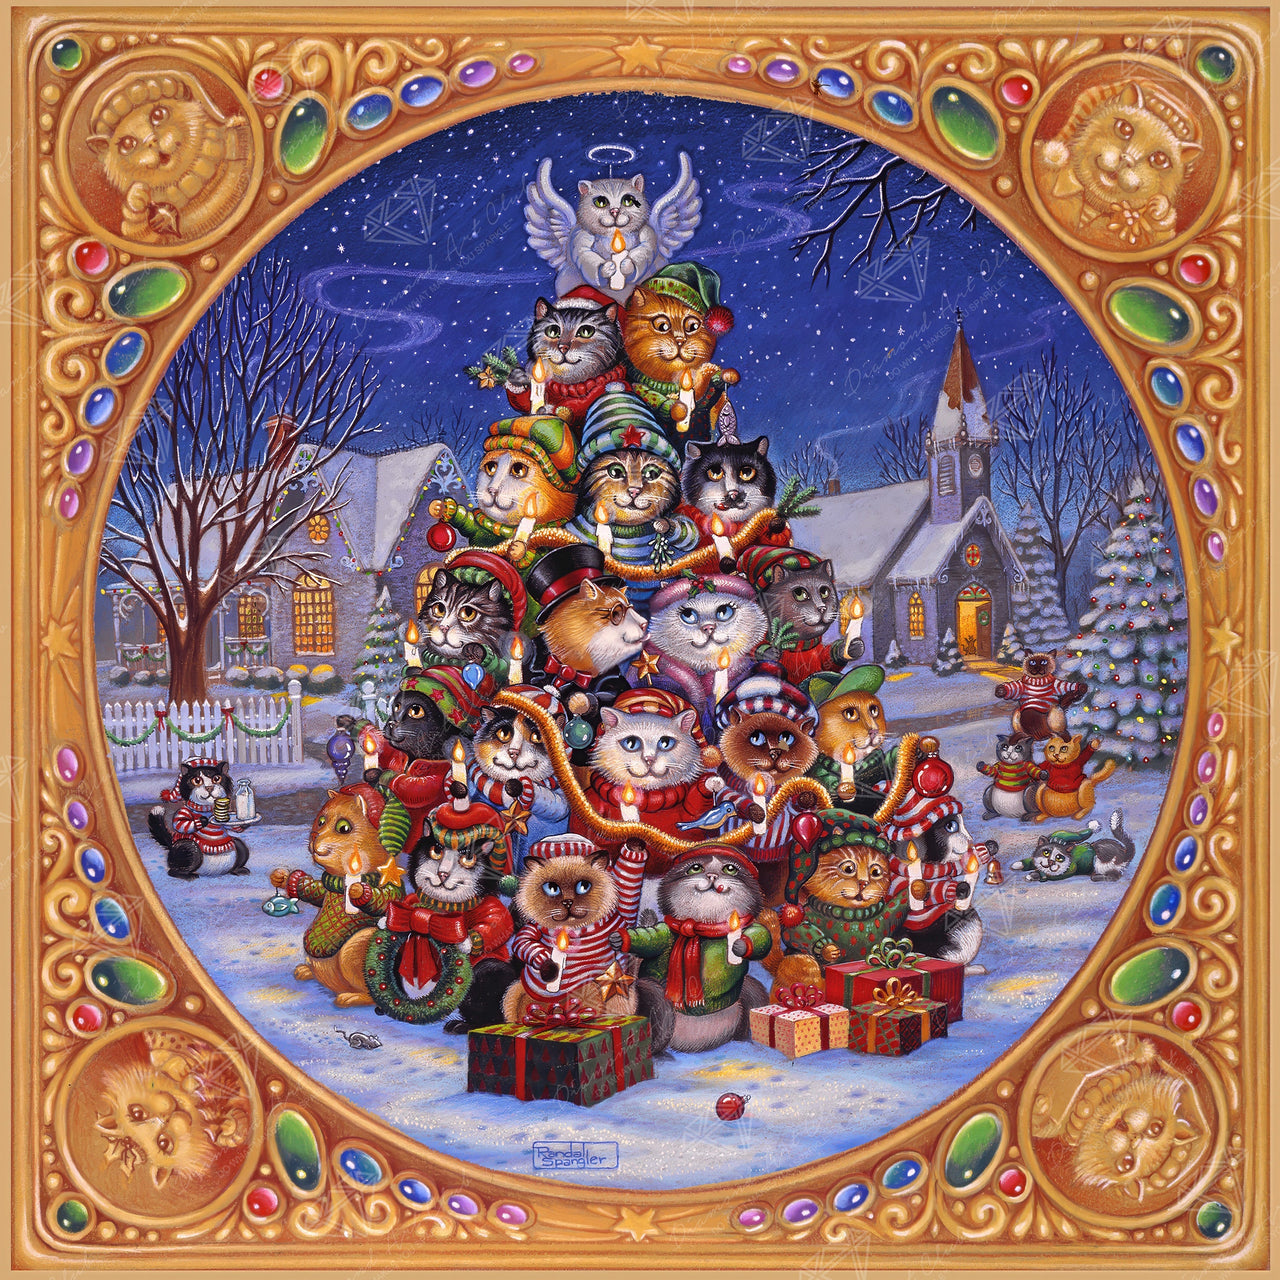 Diamond Painting O Kitten Tree 27.6" x 27.6" (70cm x 70cm) / Square with 58 Colors including 4 ABs and 3 Fairy Dust Diamonds / 78,961